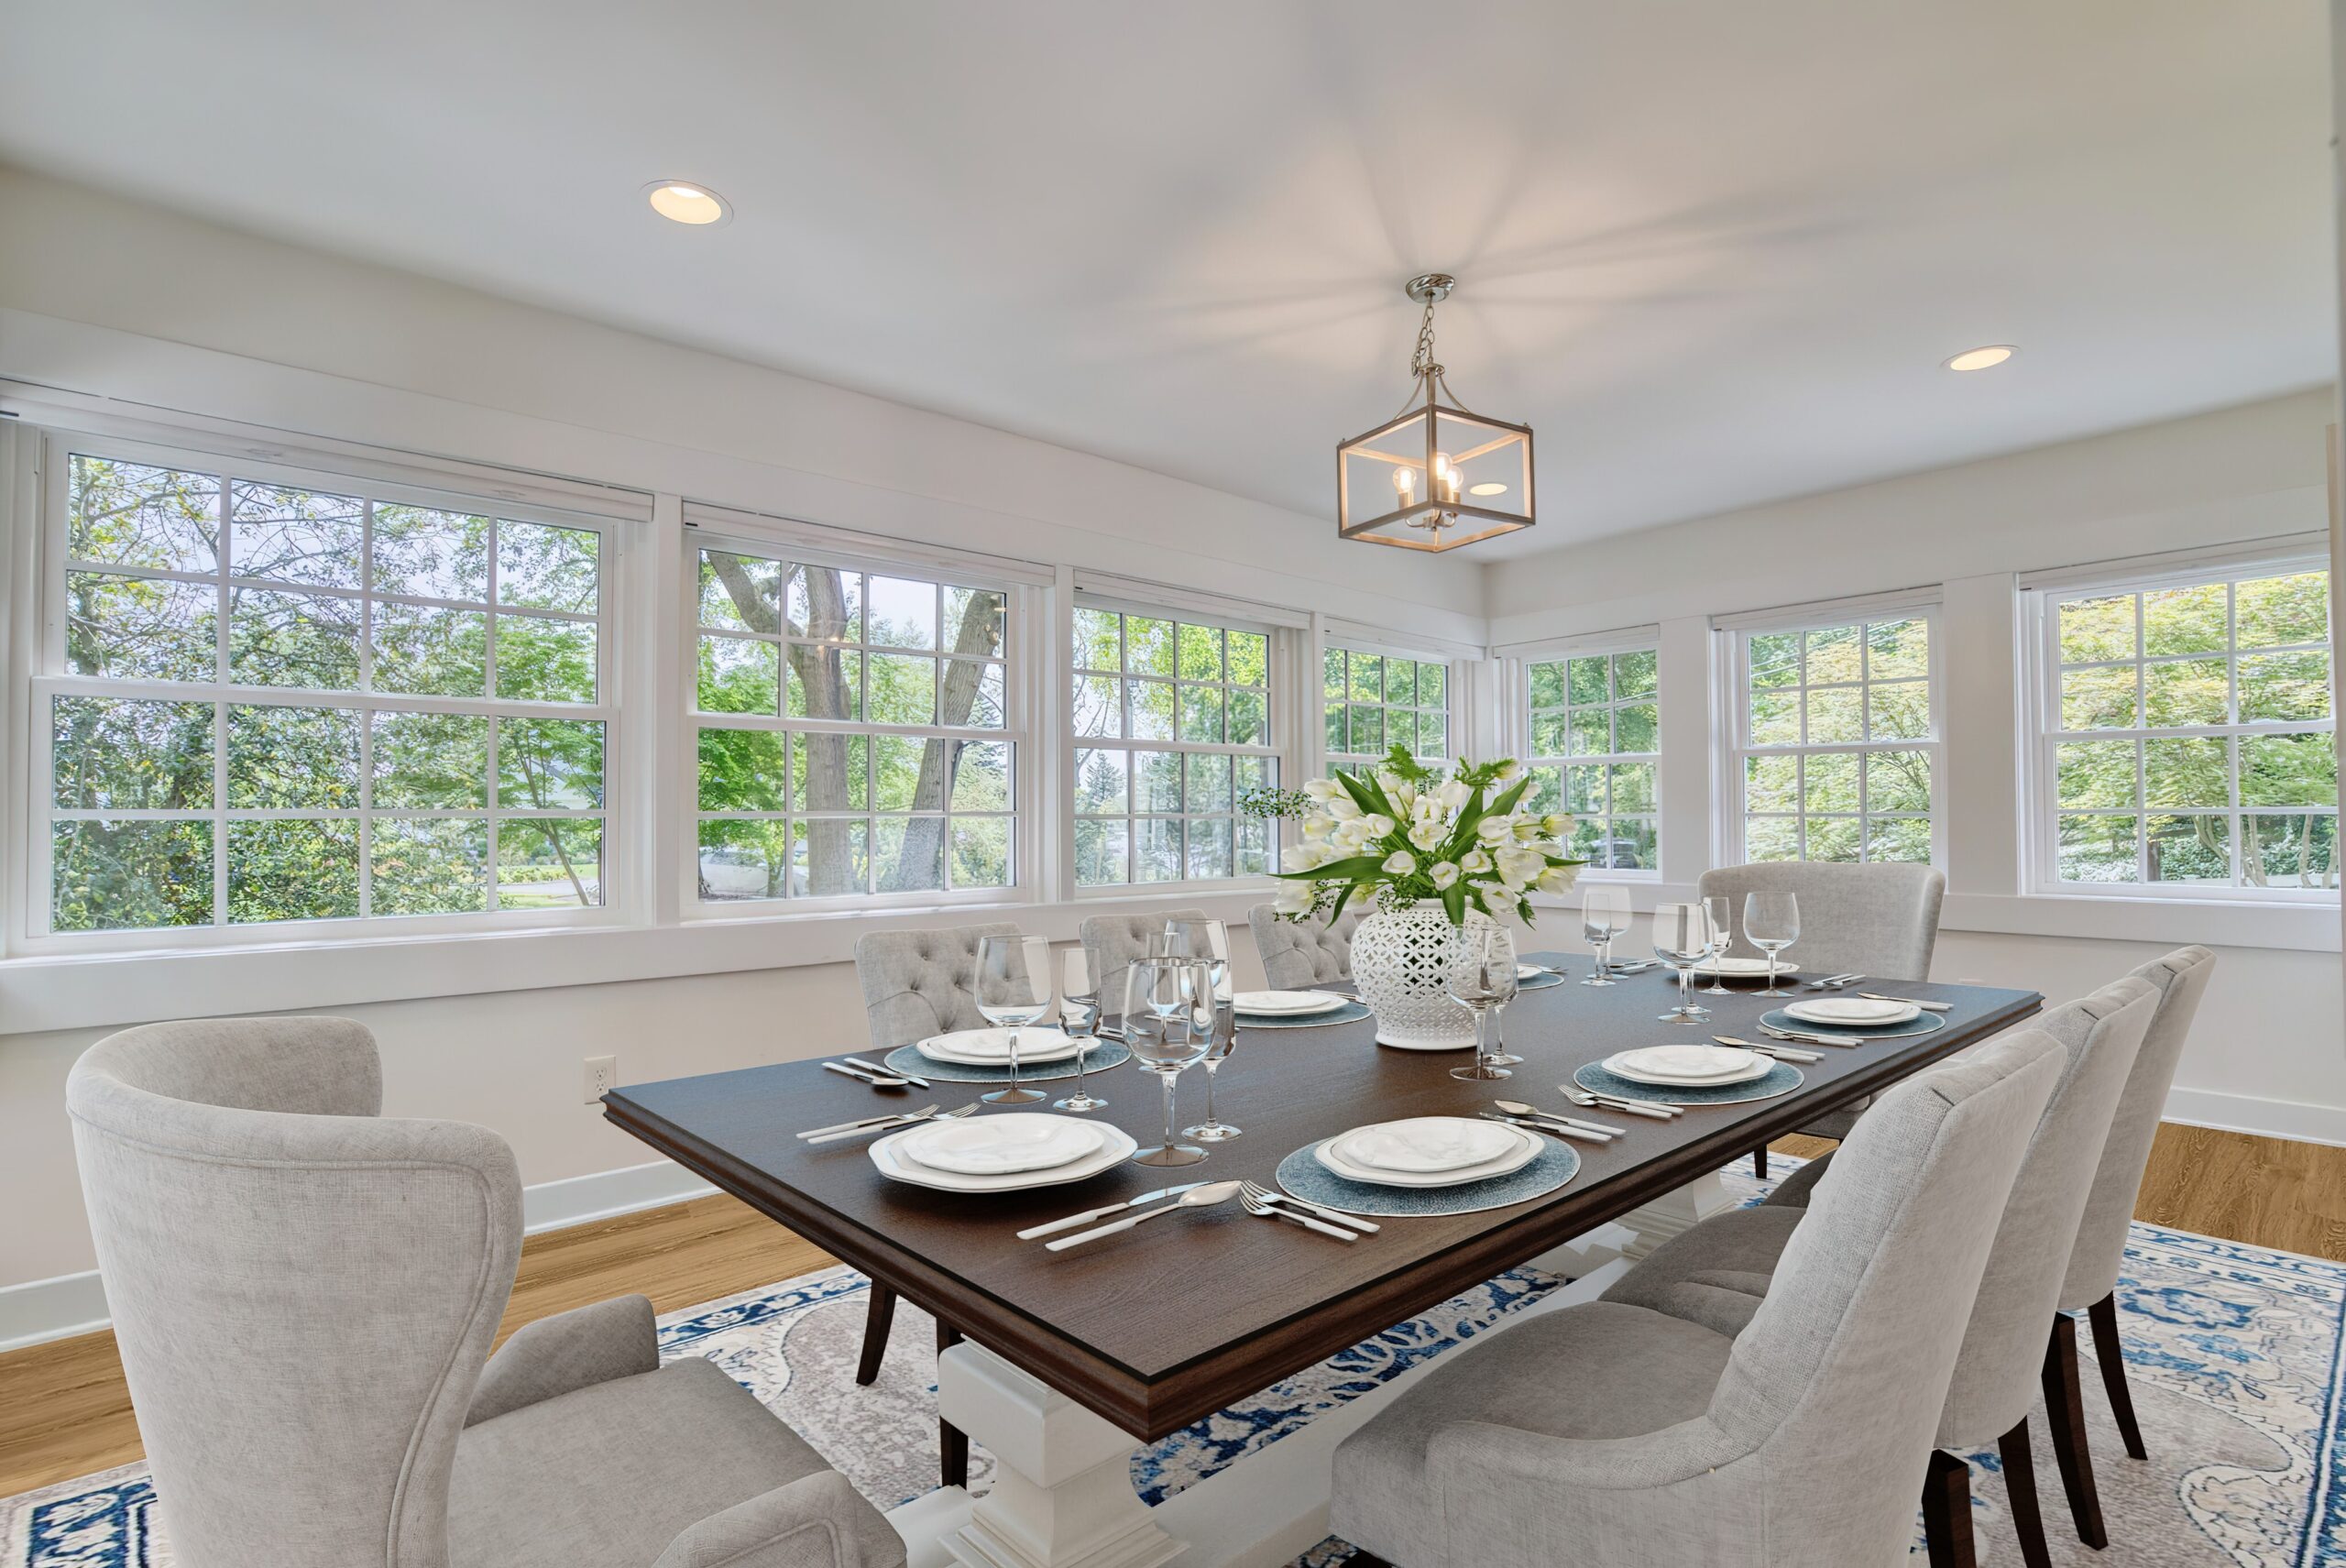 Professional interior photo of 209 Norwood Road, Annapolis, MD - showing the sunroom which us being used as the dining room with windows on all sides and hardwood floors